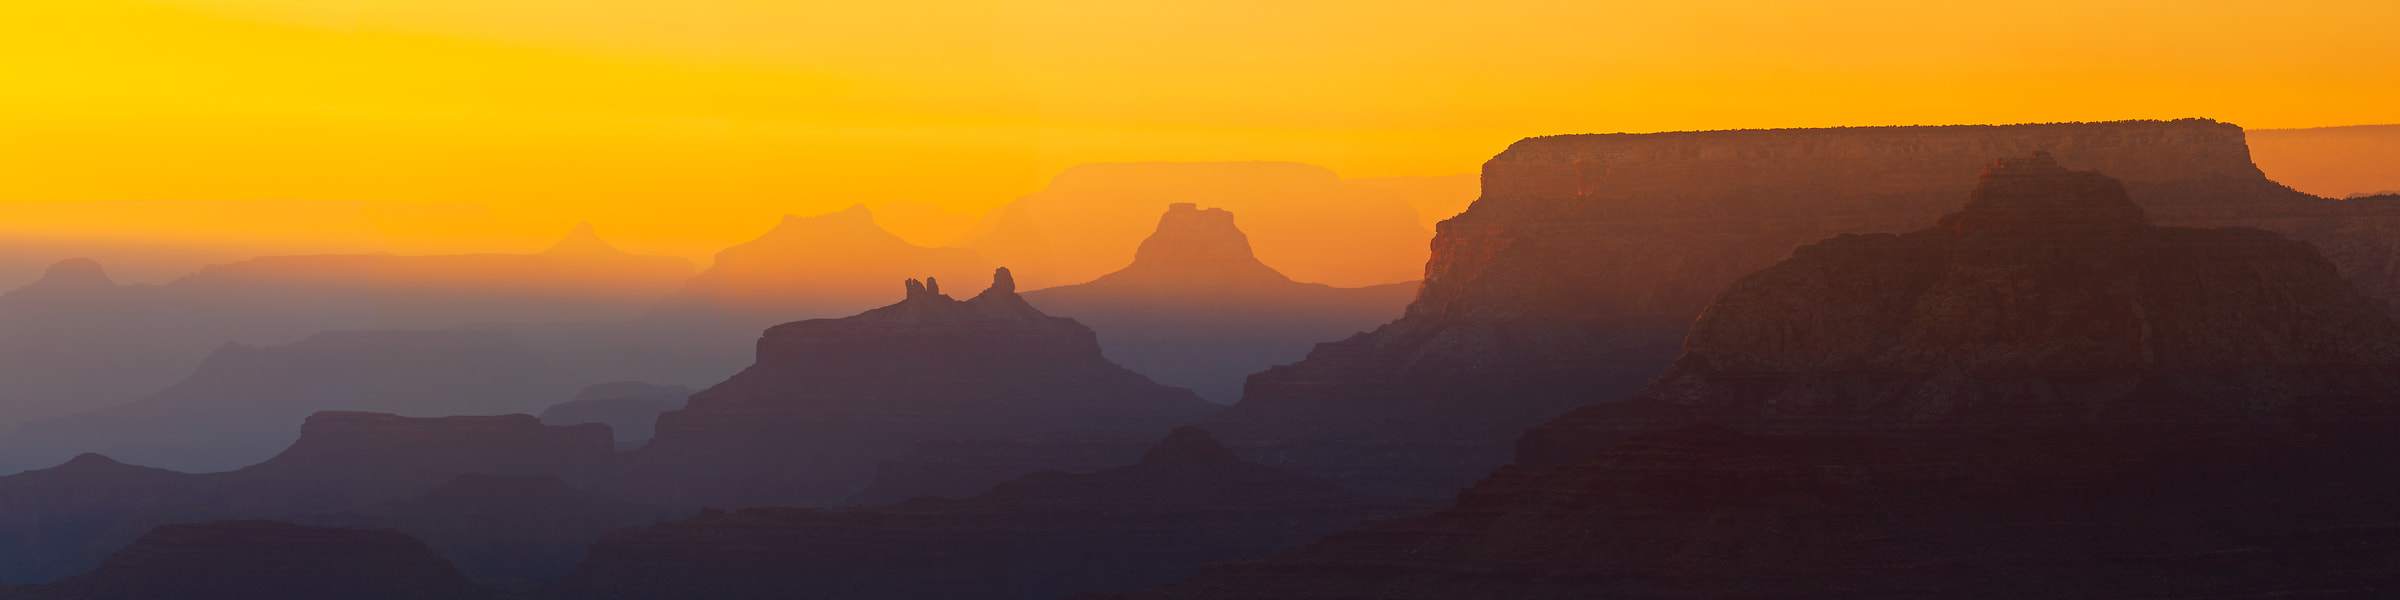 106 megapixels! A very high resolution, large-format VAST photo print of the Grand Canyon at sunset; panorama photograph created by Phillip Noll in Grand Canyon National Park, Arizona